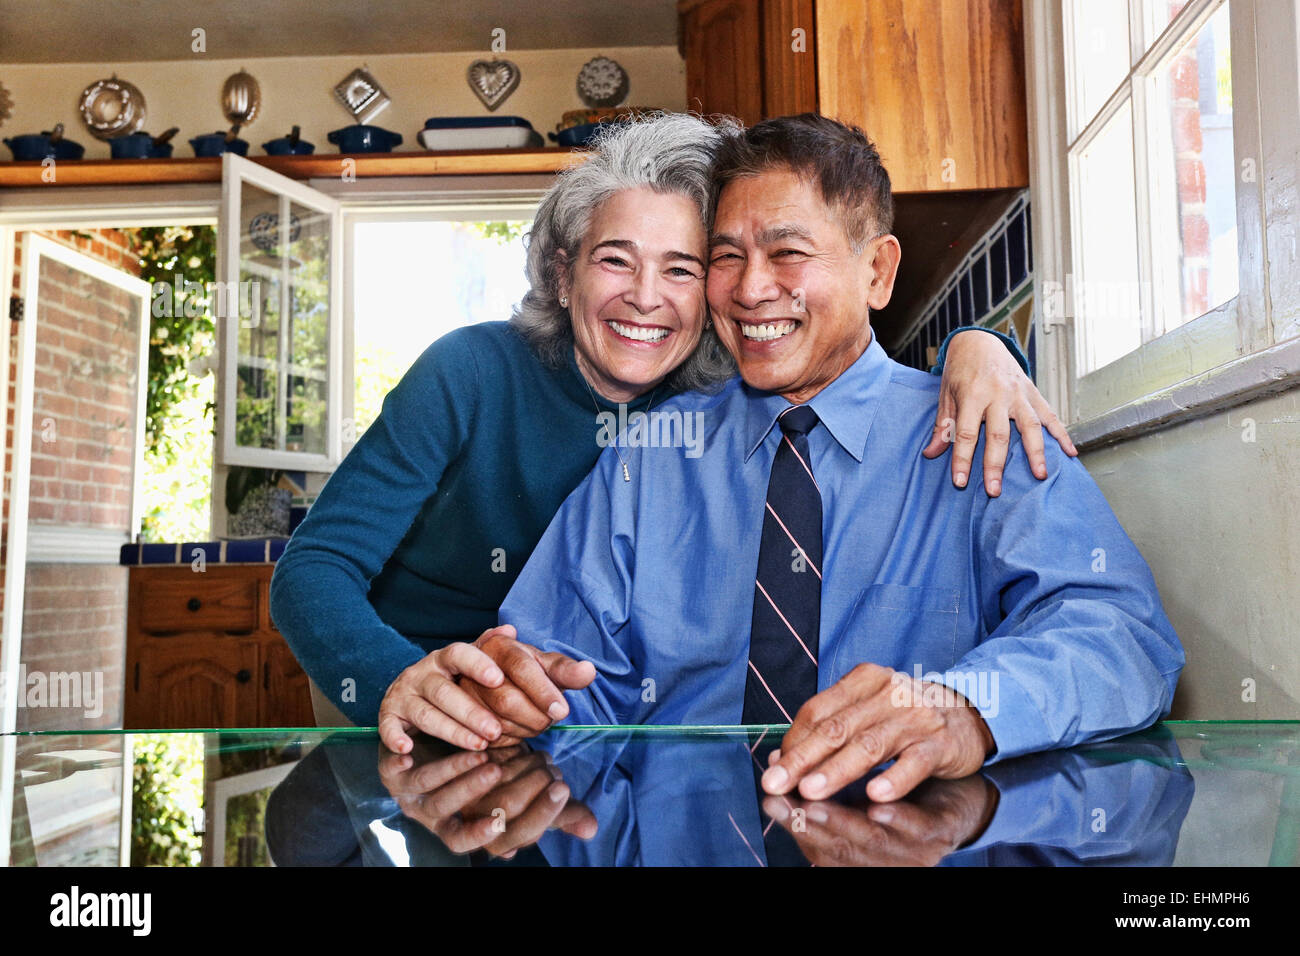 Couple smiling in kitchen Banque D'Images